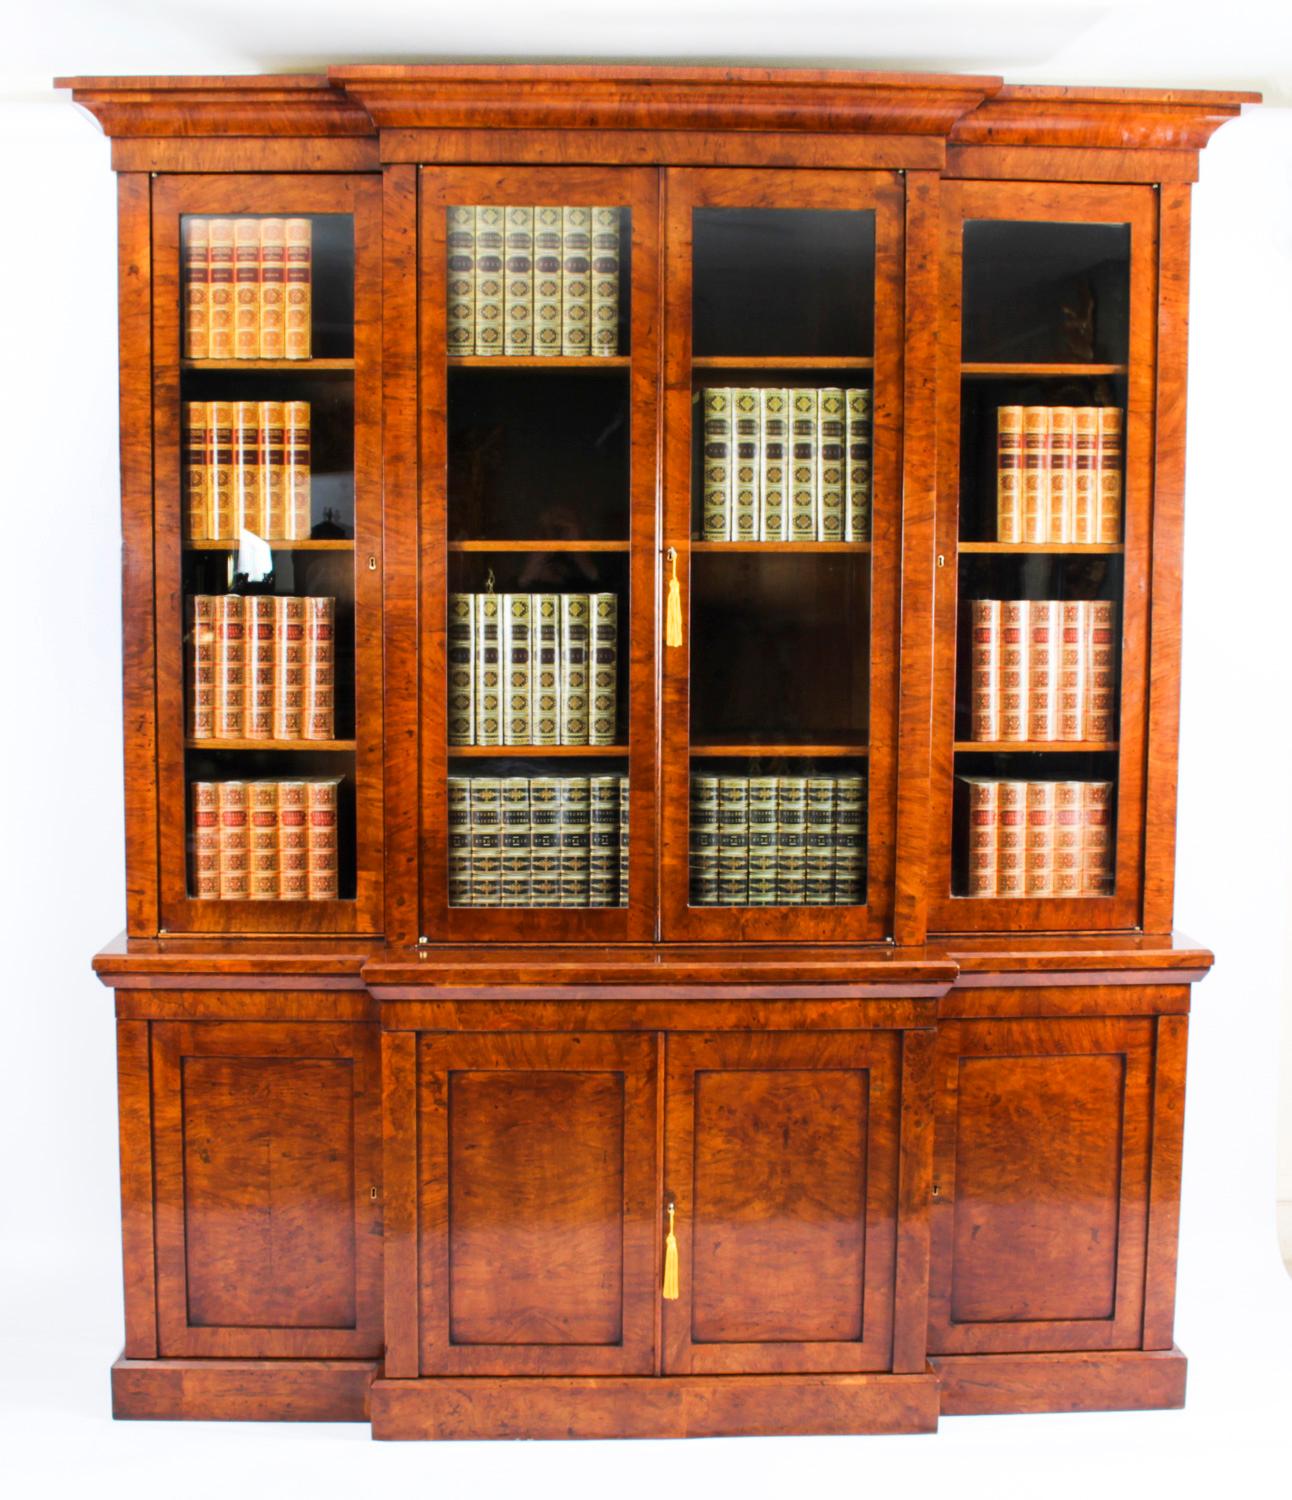 This is a beautiful and rare antique English George IV Pollard oak four door library breakfront bookcase, circa 1830 in date.

This magnificent bookcase features four glazed doors in the upper section revealing the twelve original oak shelves that